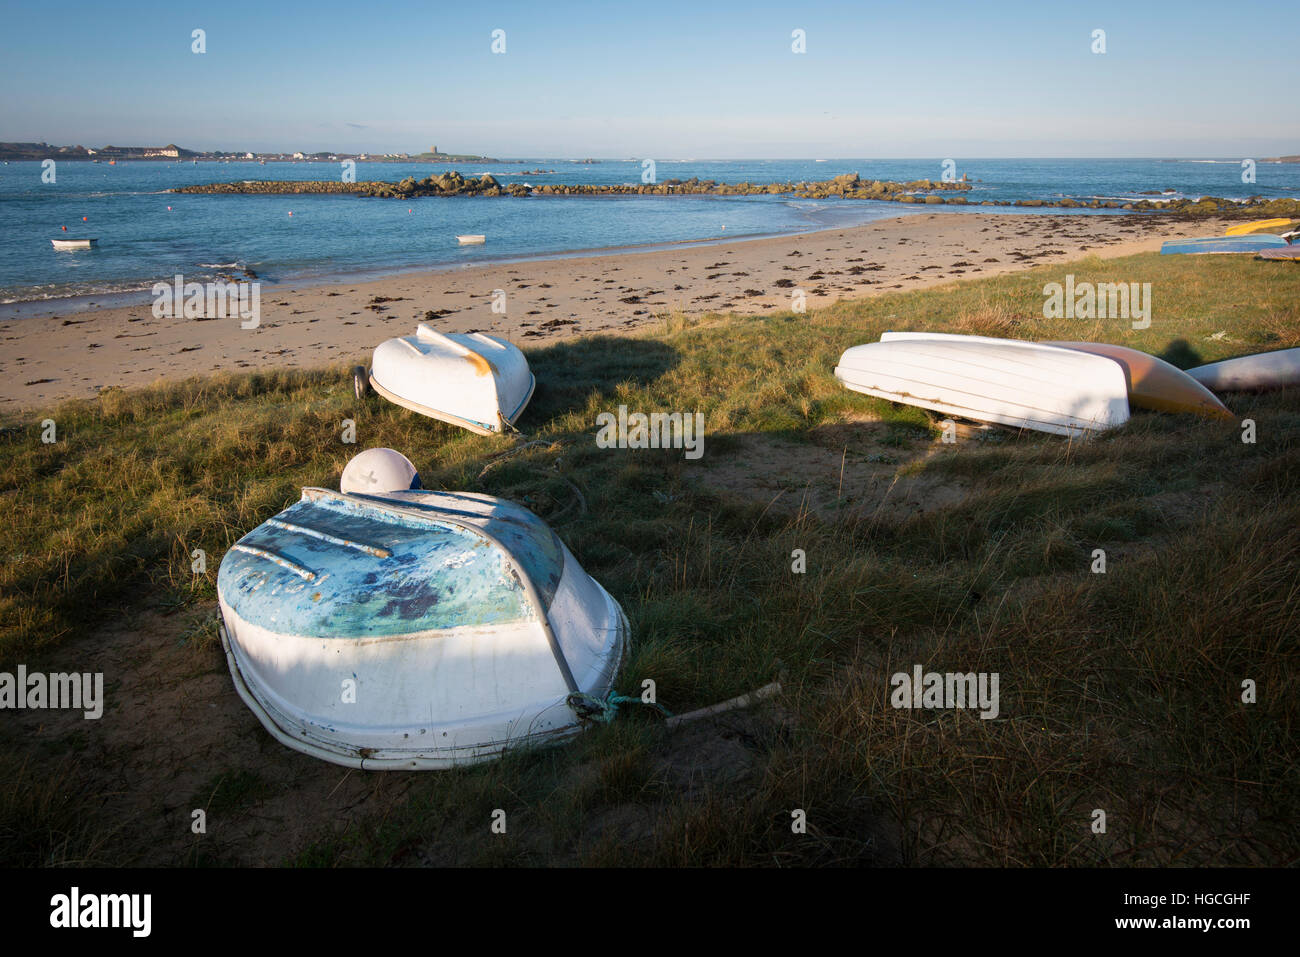 Small upturned boats on grass at top of beach, with rocks in the background and blue sky. Stock Photo